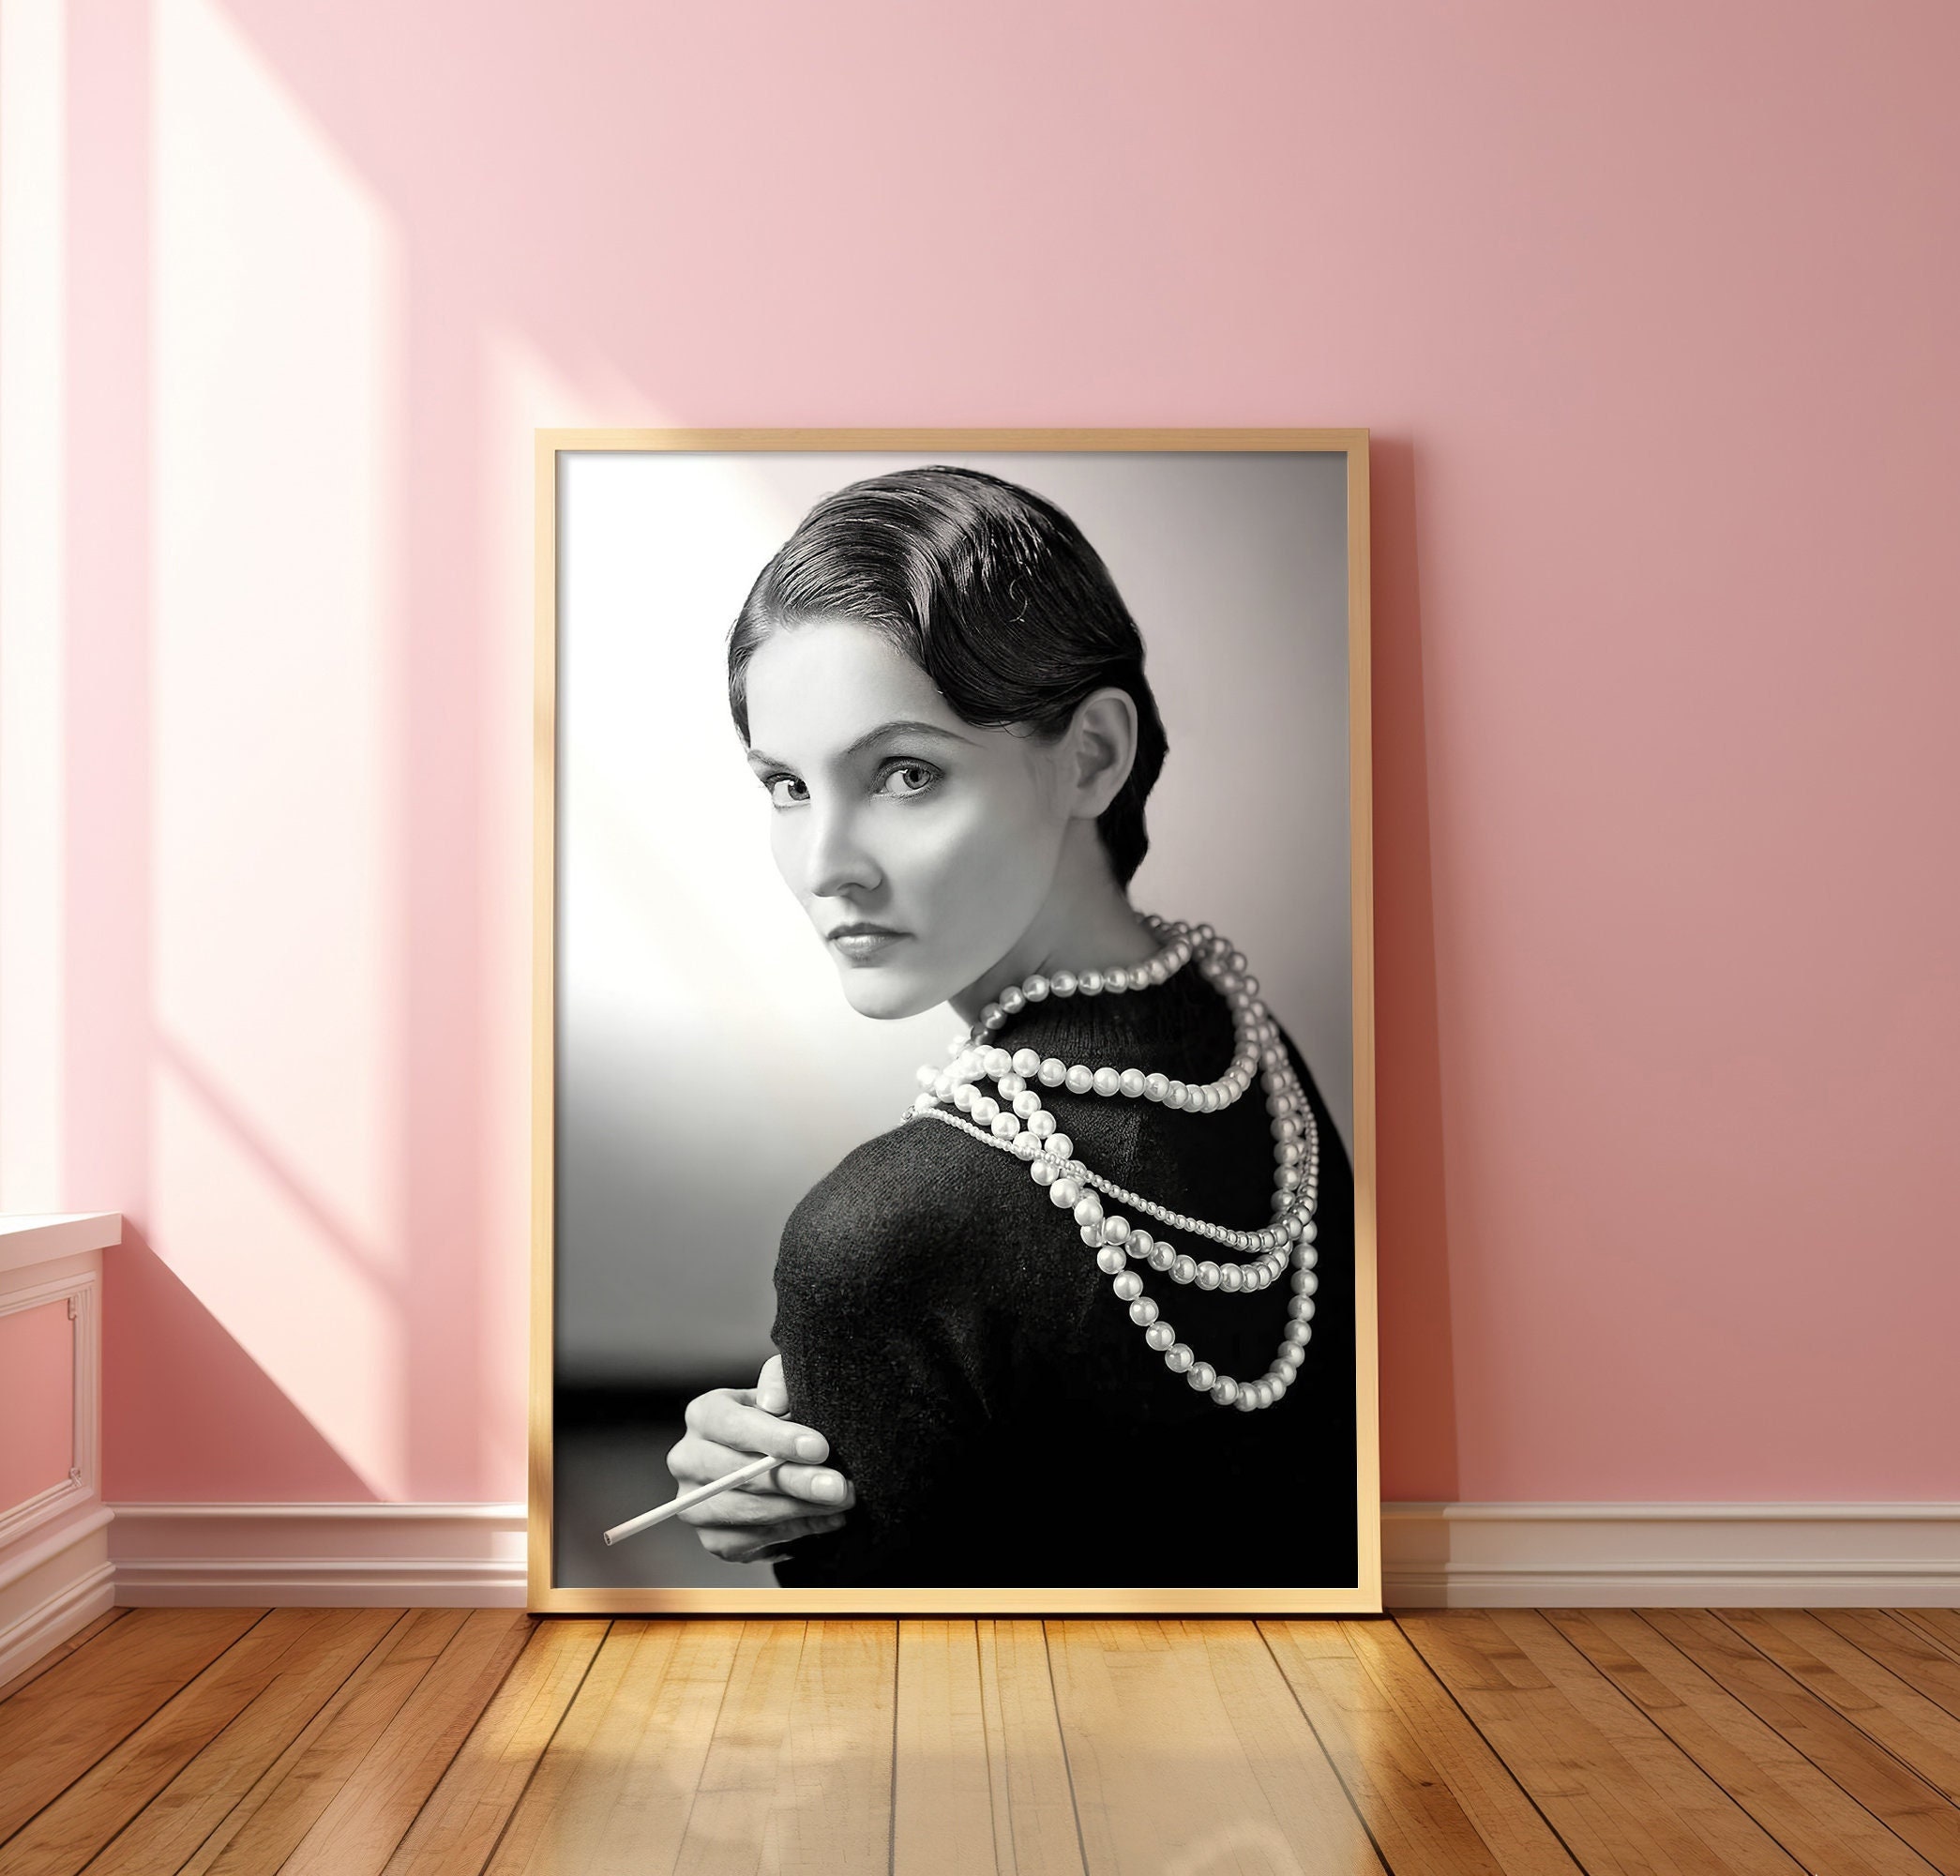 An Ode to Coco Chanel's Personal Style